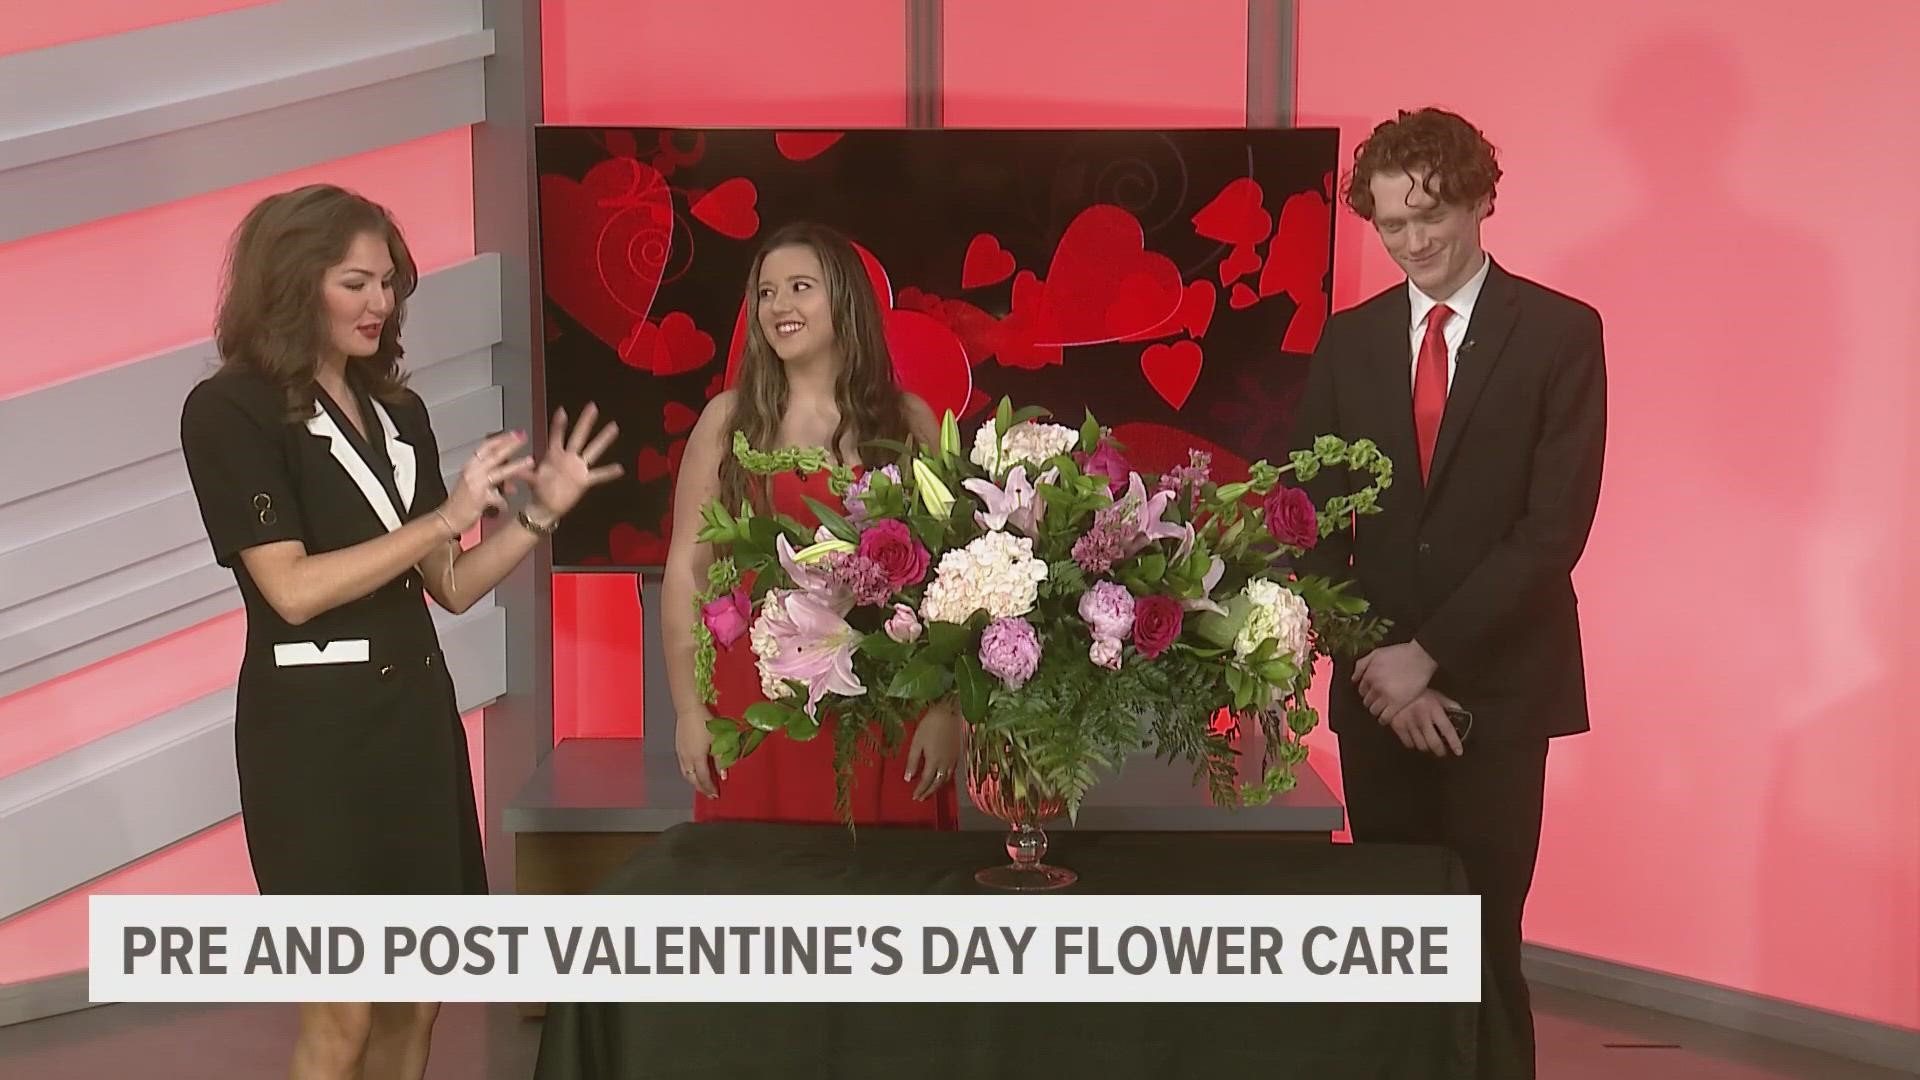 Local florist Eden Garett shares what creating floral arrangements and bouquets entail along with tips and tricks to keeping flowers fresh for as long as possible.